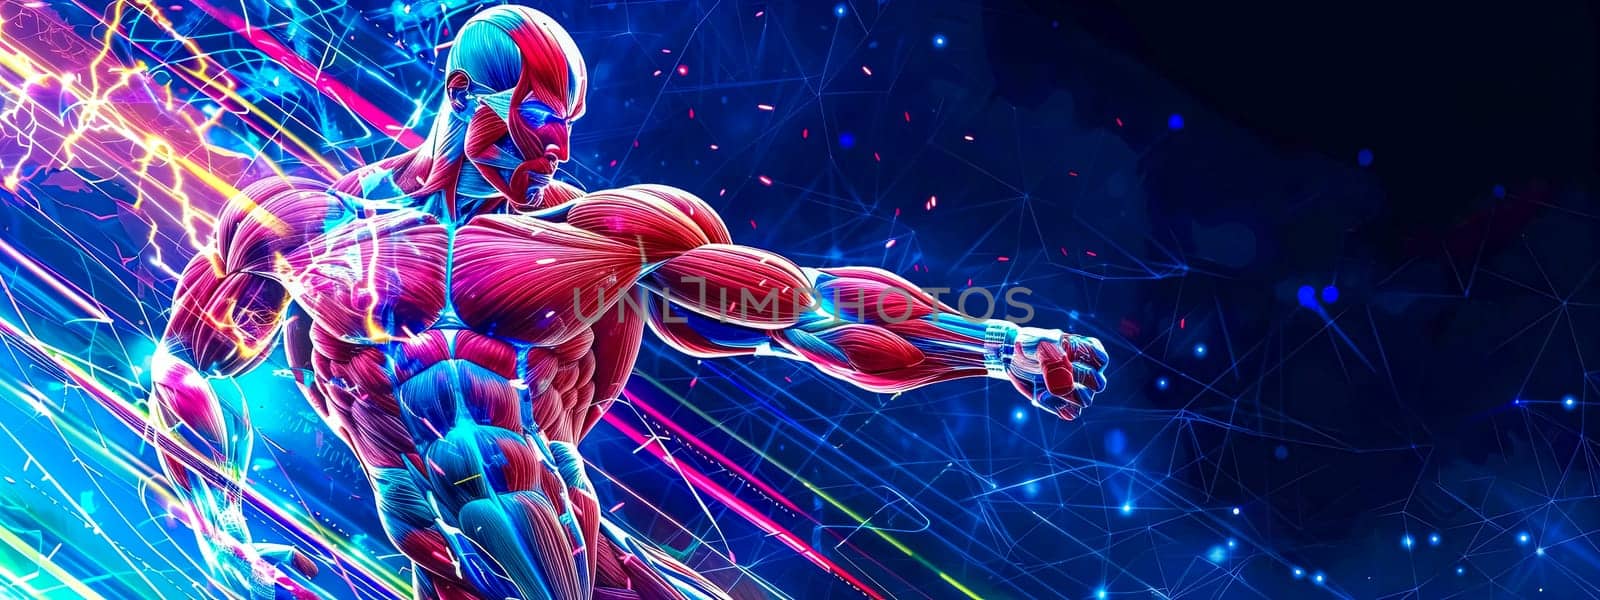 Vibrant digital artwork showcasing a detailed human muscular system in action on a futuristic blue backdrop